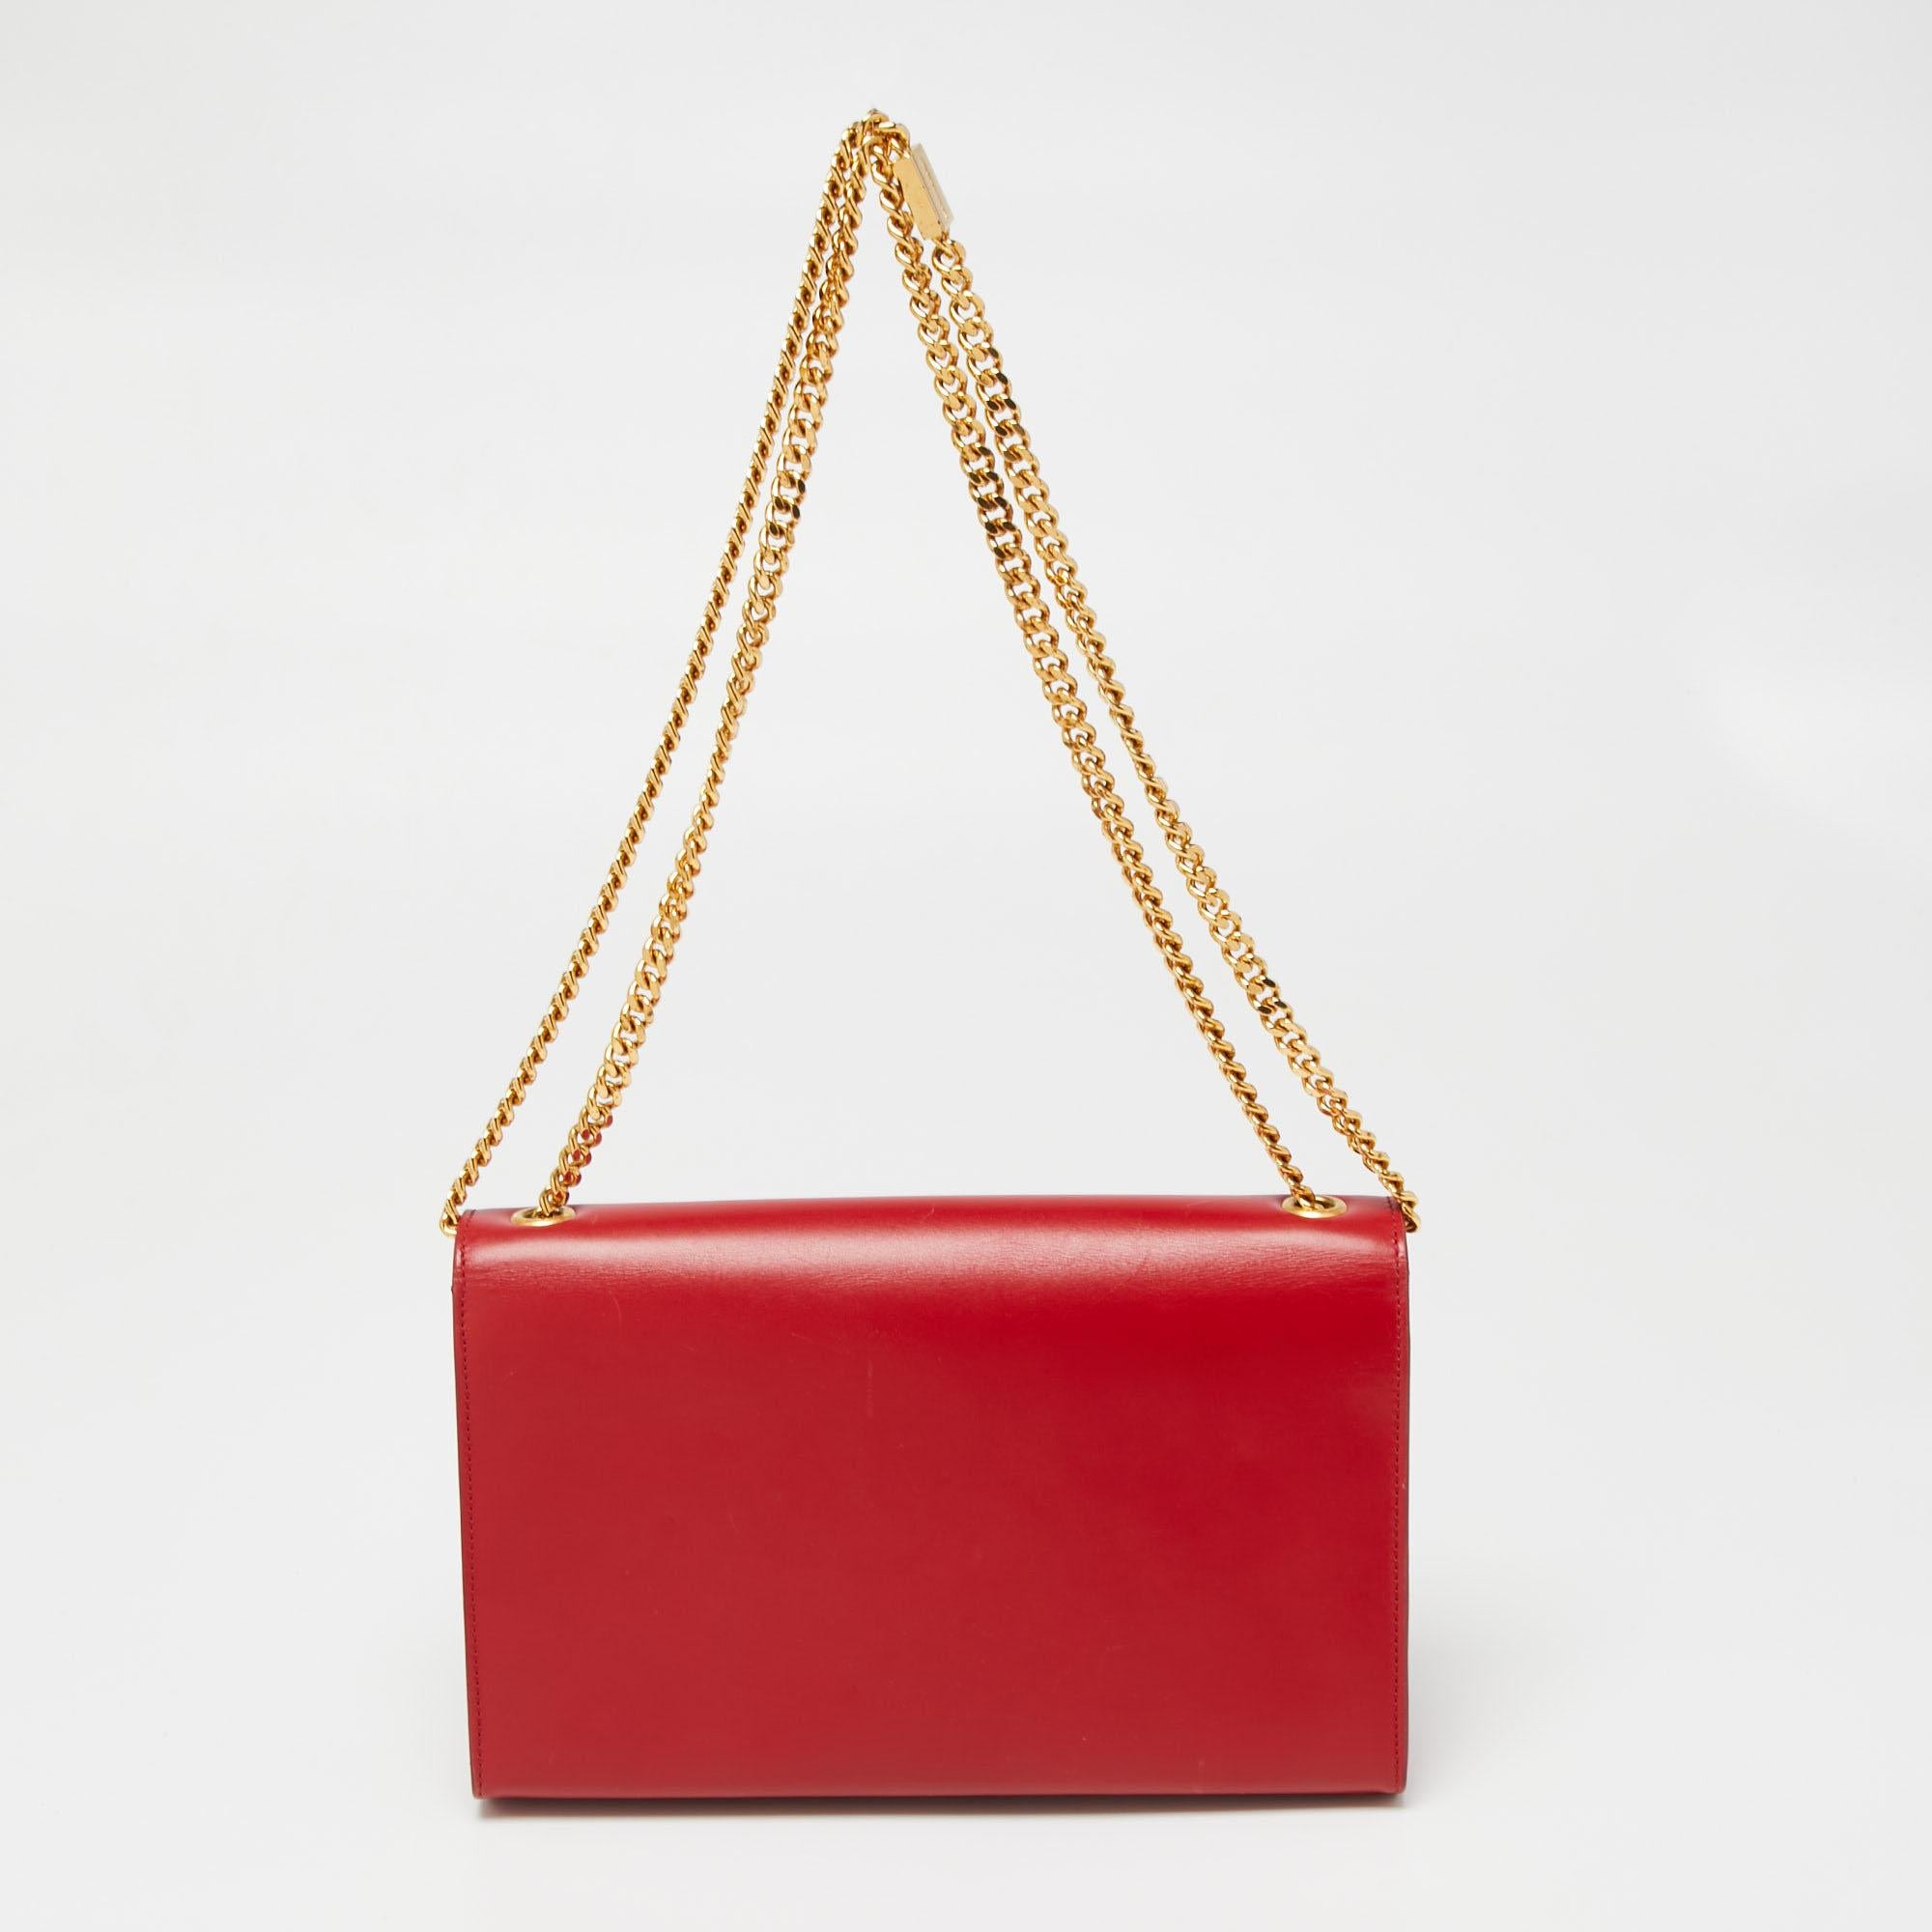 The Kate shoulder bag by Saint Laurent has all the details that make it a special designer bag. Crafted using leather, the bag features a sturdy gold-tone shoulder chain, the YSL logo with a tassel on the front flap, and a lined compartment to store